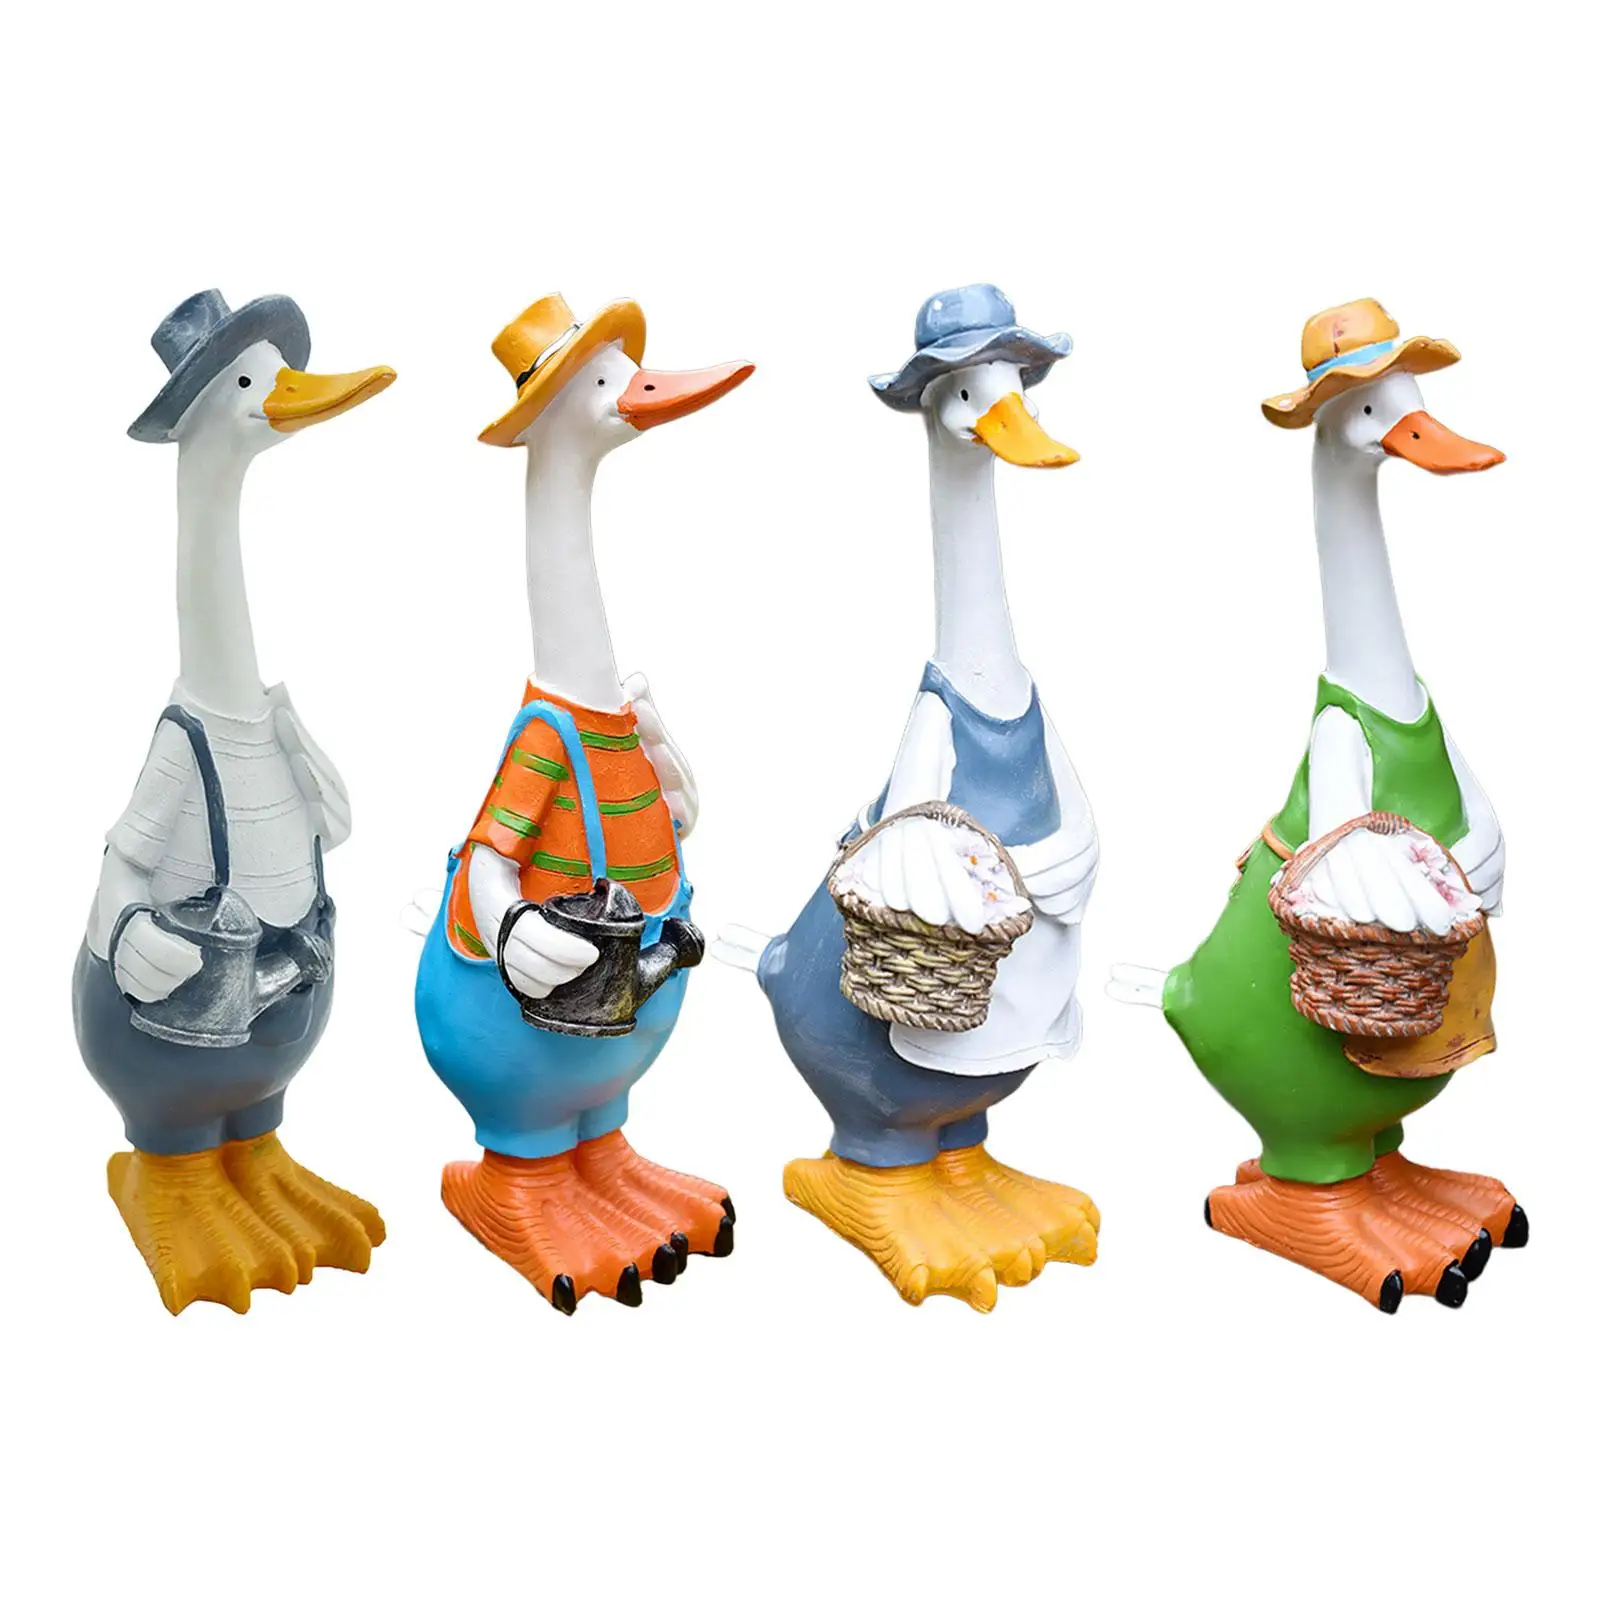 Resin Duck Statues Figurines Decoration Garden Duck Ornament for Patio Lawn